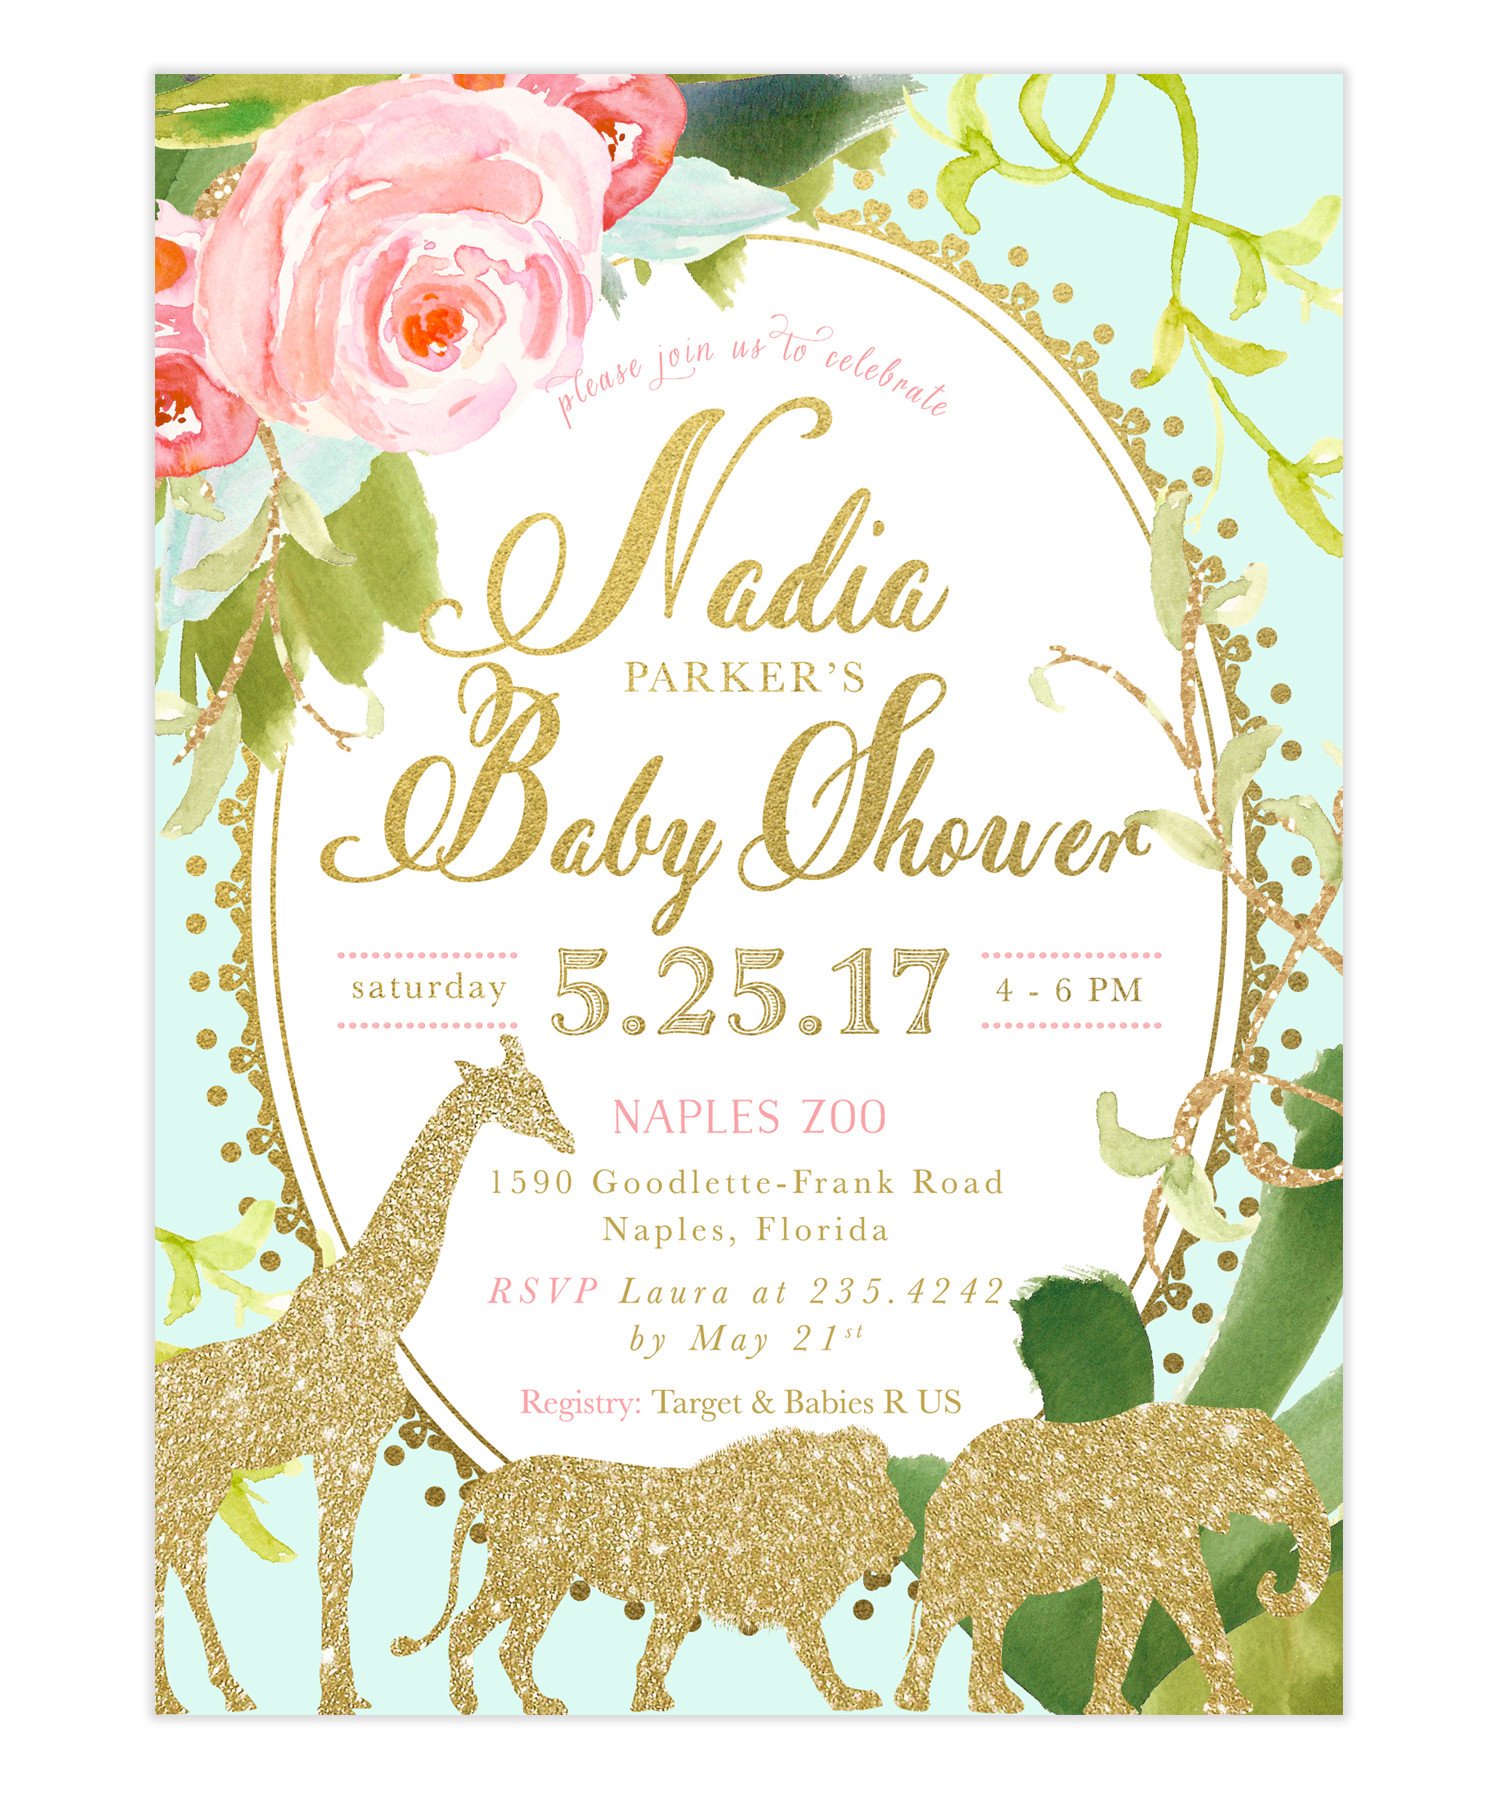 Full Size of Baby Shower:nautical Baby Shower Invitations For Boys Baby Girl Themes For Bedroom Baby Shower Ideas Baby Shower Decorations Themes For Baby Girl Nursery Homemade Baby Shower Decorations Unique Baby Shower Themes Nautical Baby Shower Invitations For Boys Printable Baby Shower Invitations For Girl